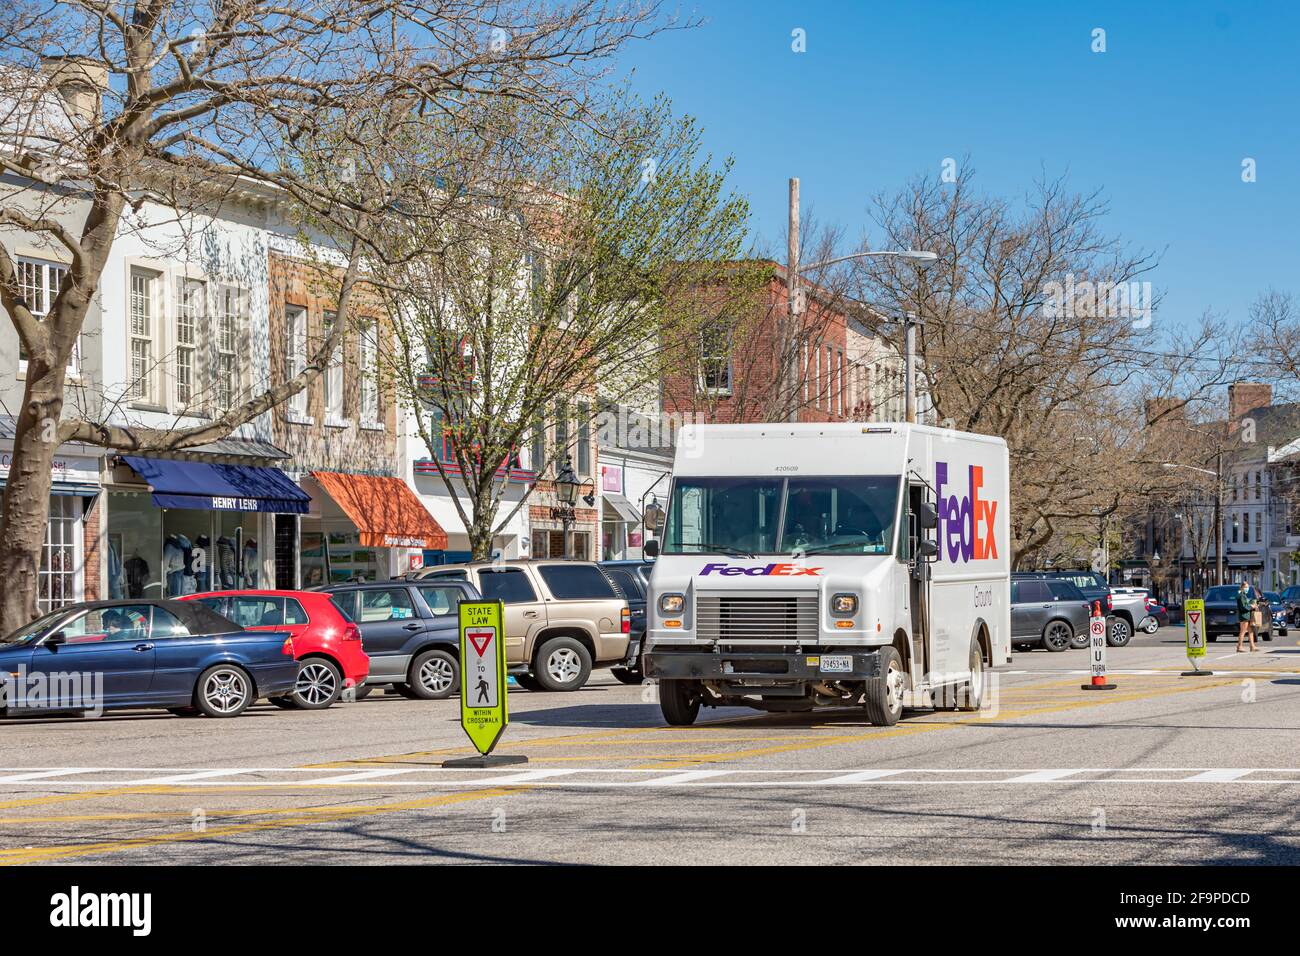 A Fedex Box truck parked in the middle of a main street making deliveries Stock Photo